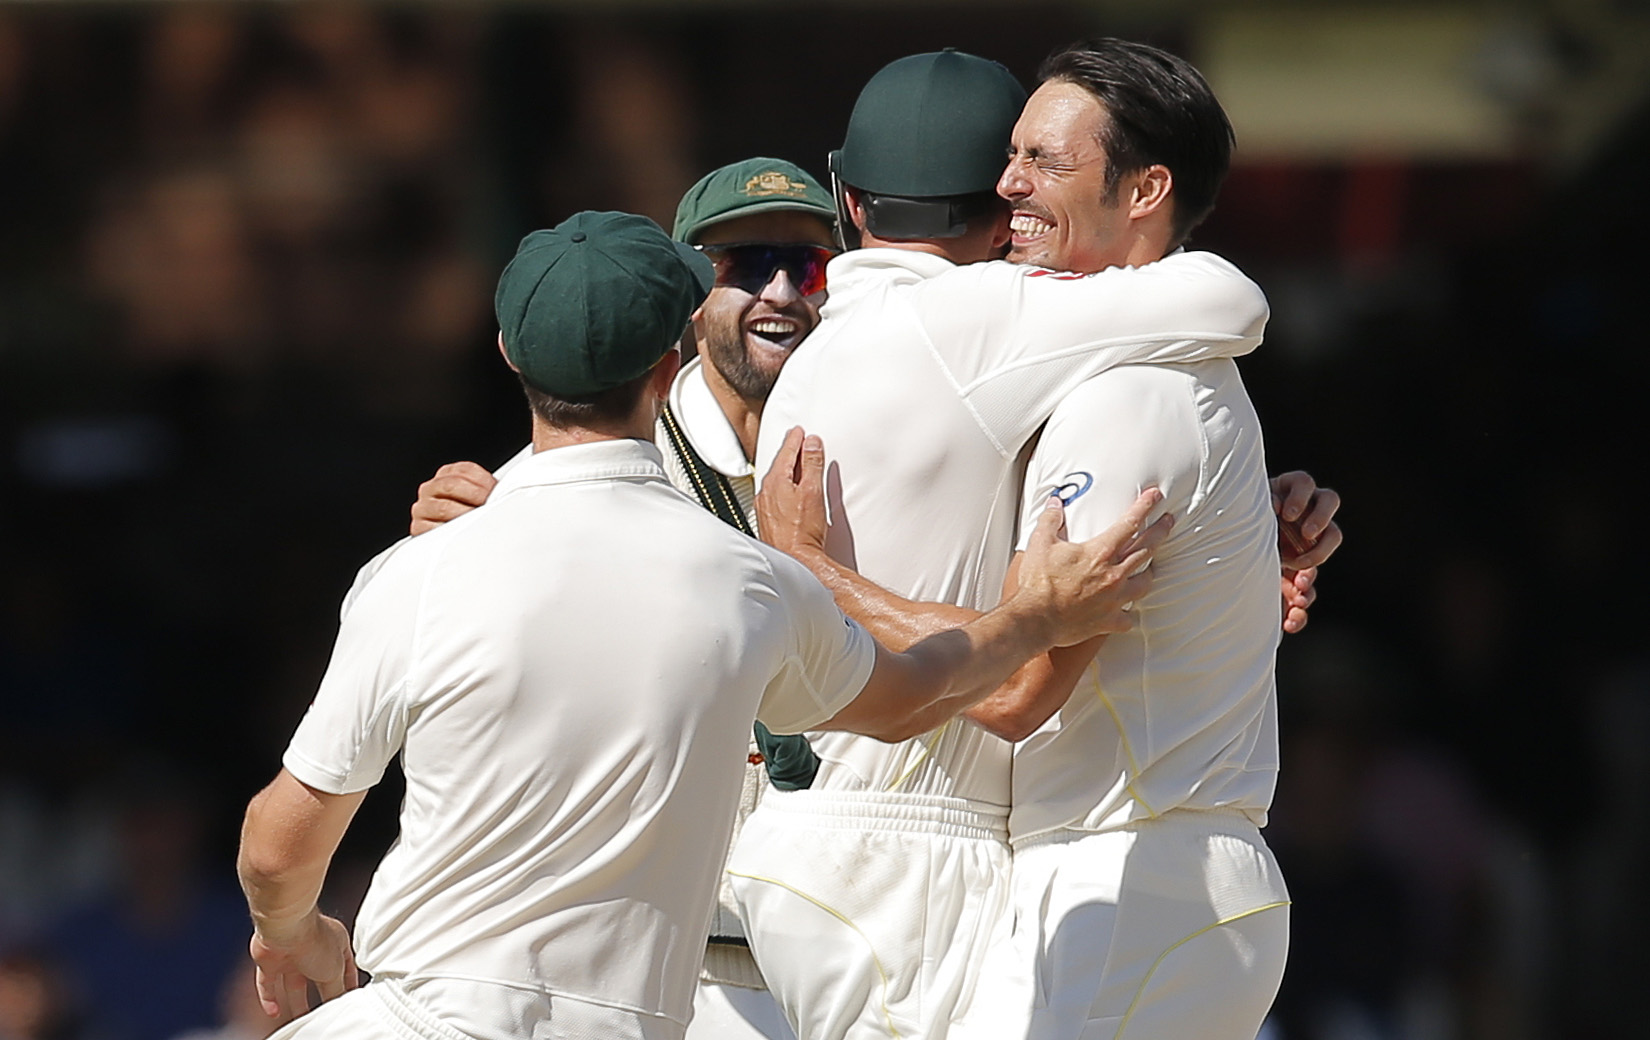 Australia’s Mitchell Johnson celebrates the wicket of England’s Moeen Ali in their crushing win in the second Ashes test at Lord’s. Photo: Reuters